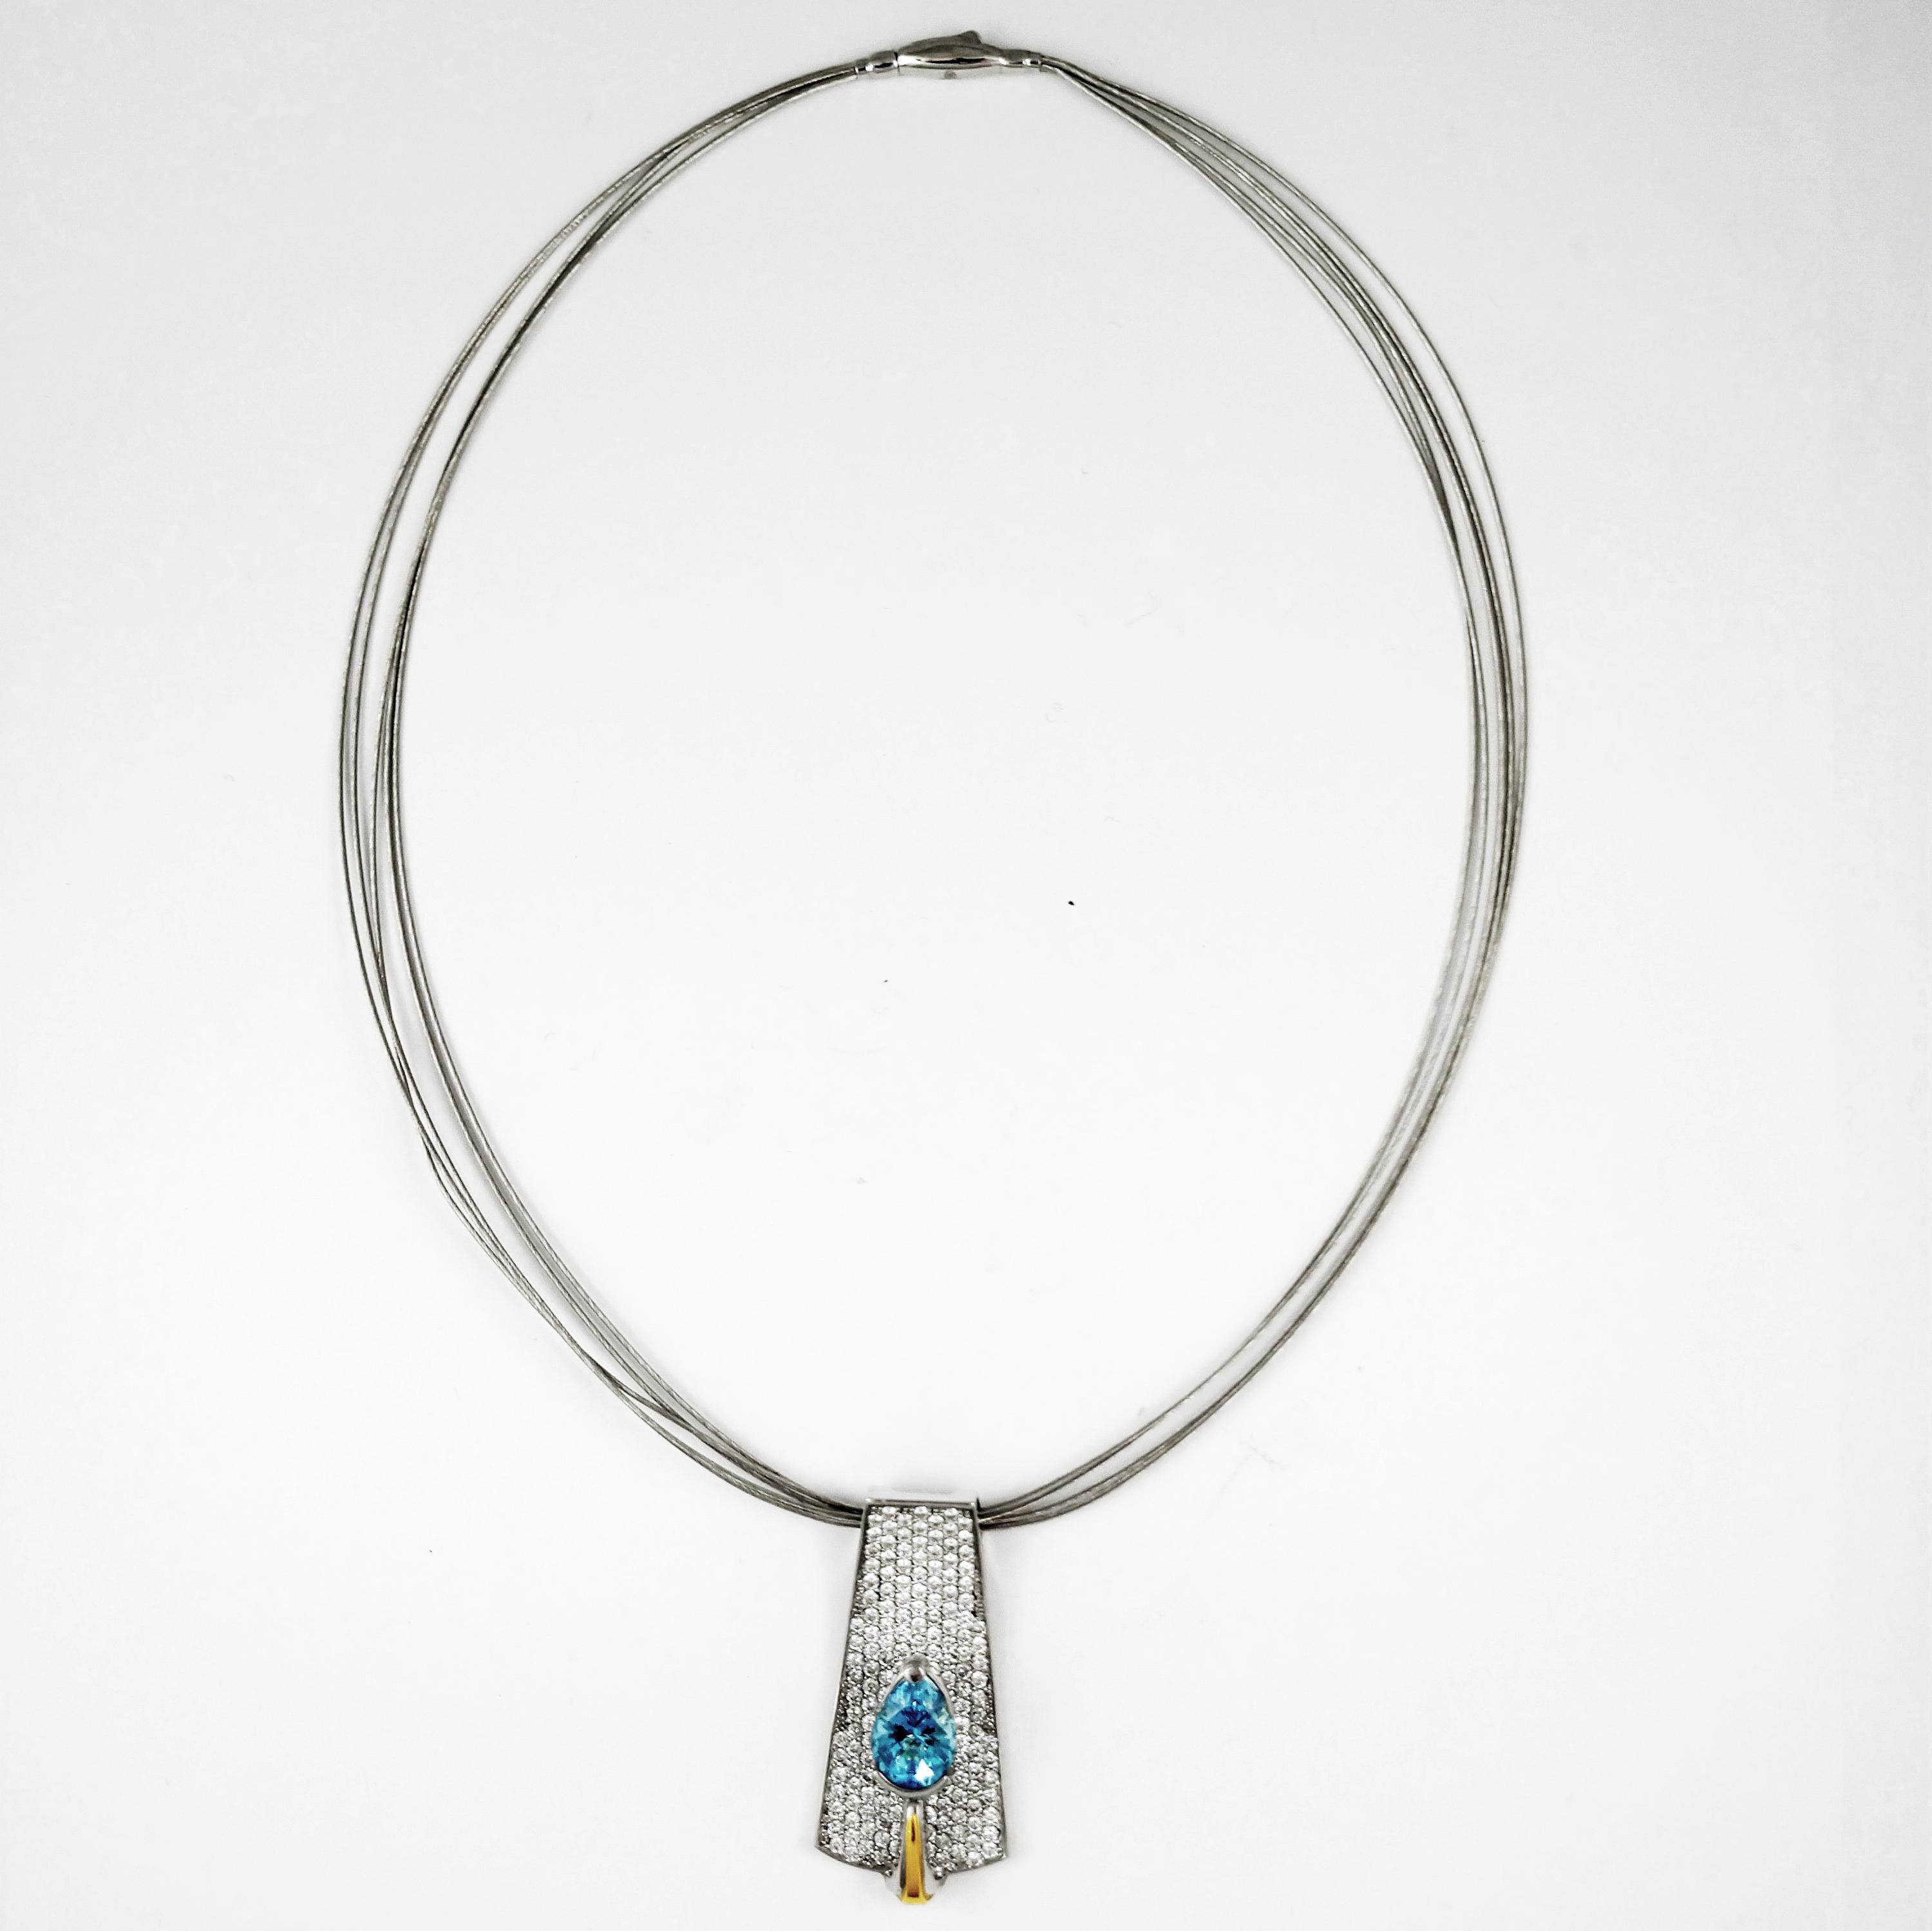 Aquamarine Drop Necklace 18K White & Yellow Gold with Pave Diamonds Contemporary In New Condition For Sale In Scottsdale, AZ